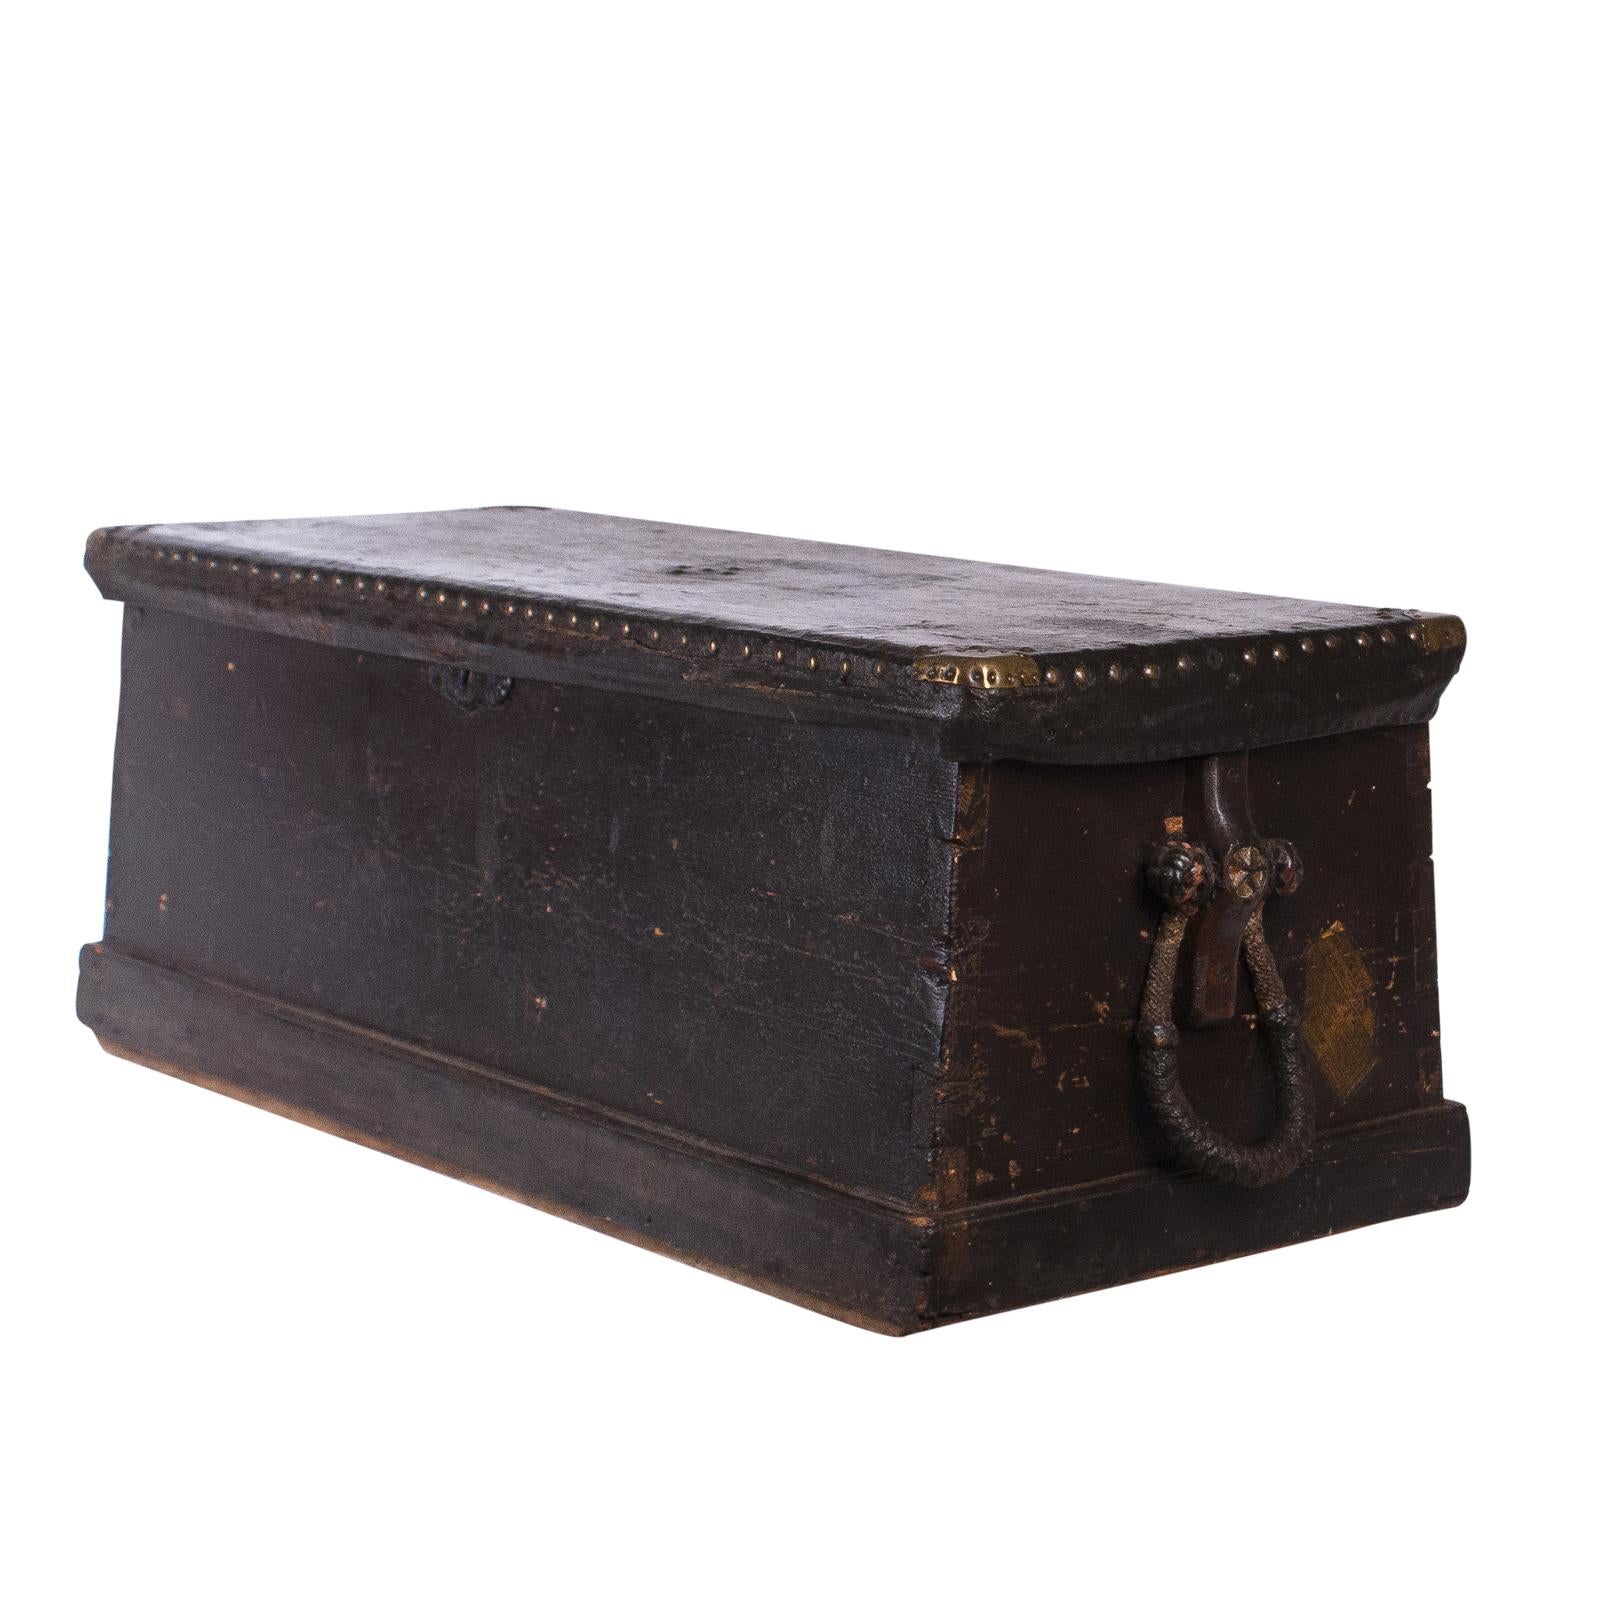 A mid-19th century sea chest with a leather top studded with nailheads and leather handles, Hawaii, circa 1860. Provenance available to new owner. 

 